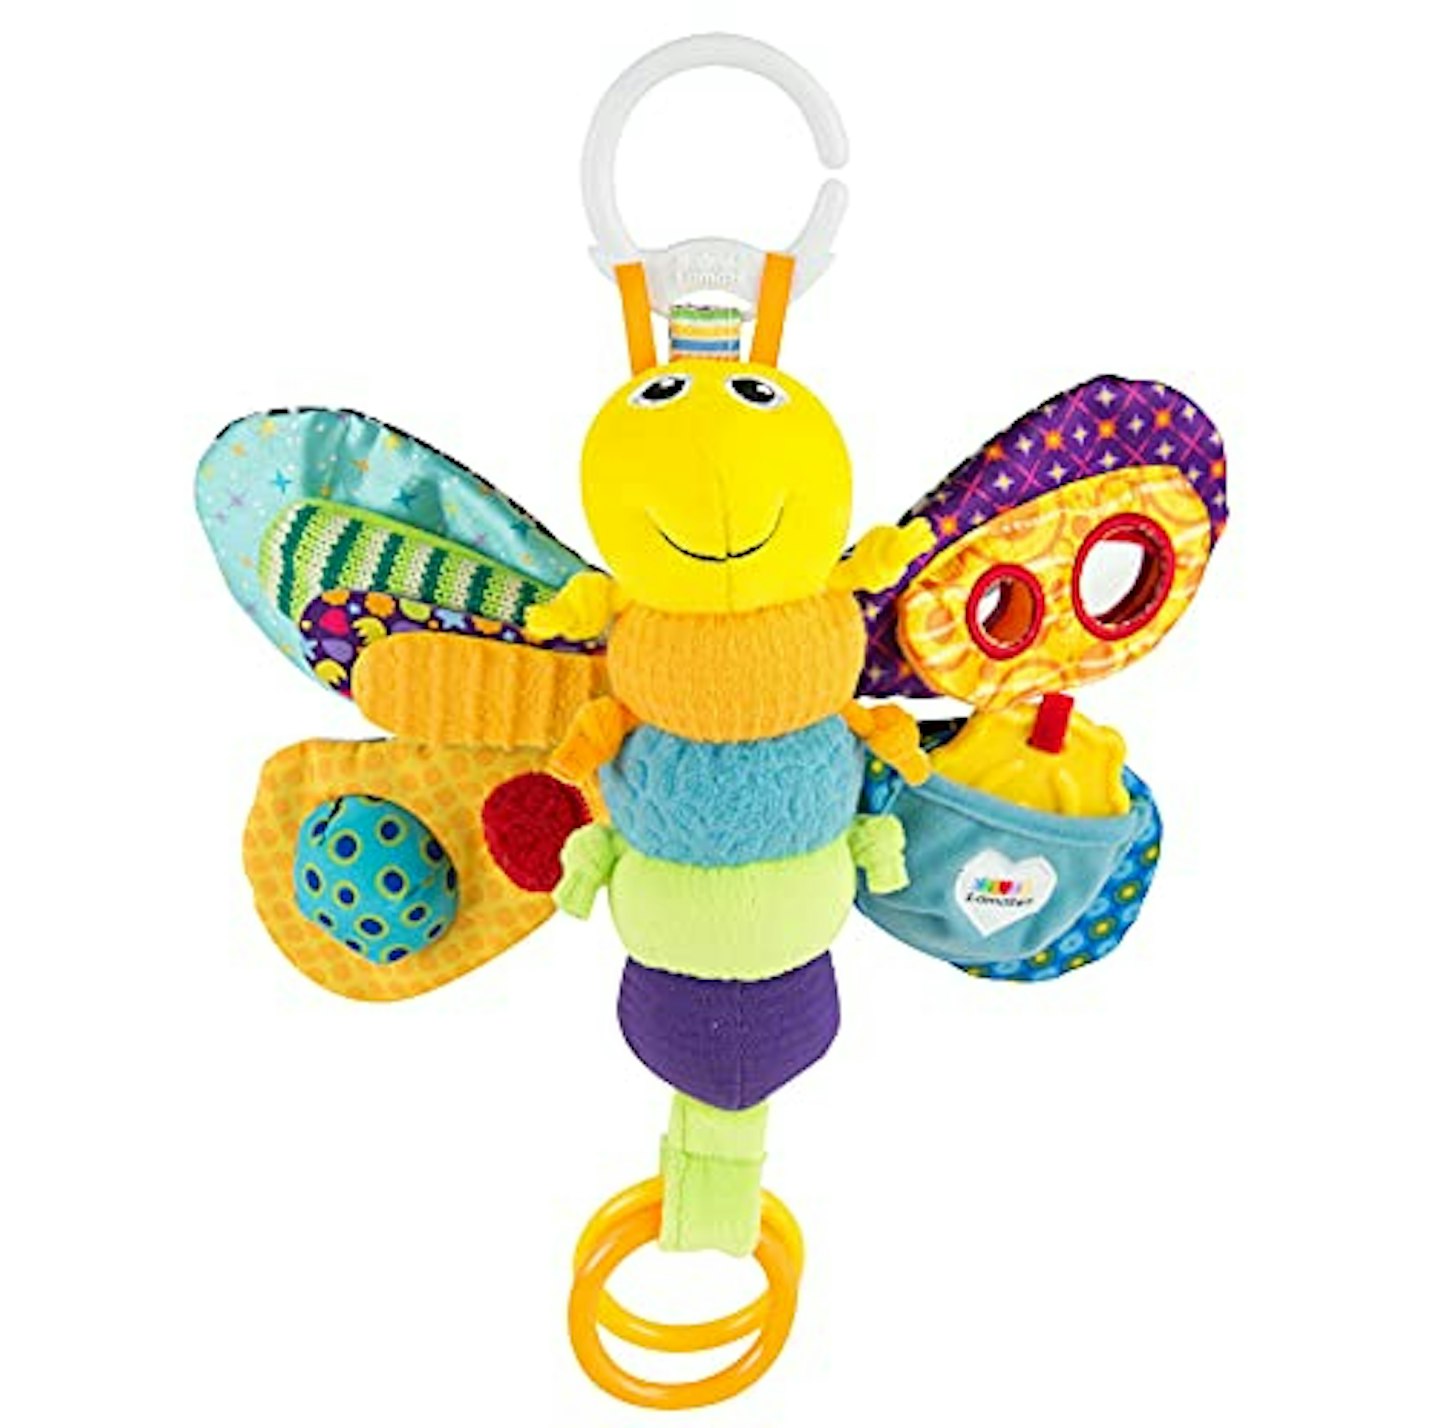 Lamaze Freddie The Firefly - Clip On Pram and Pushchair Newborn Baby Toy - Suitable from Birth